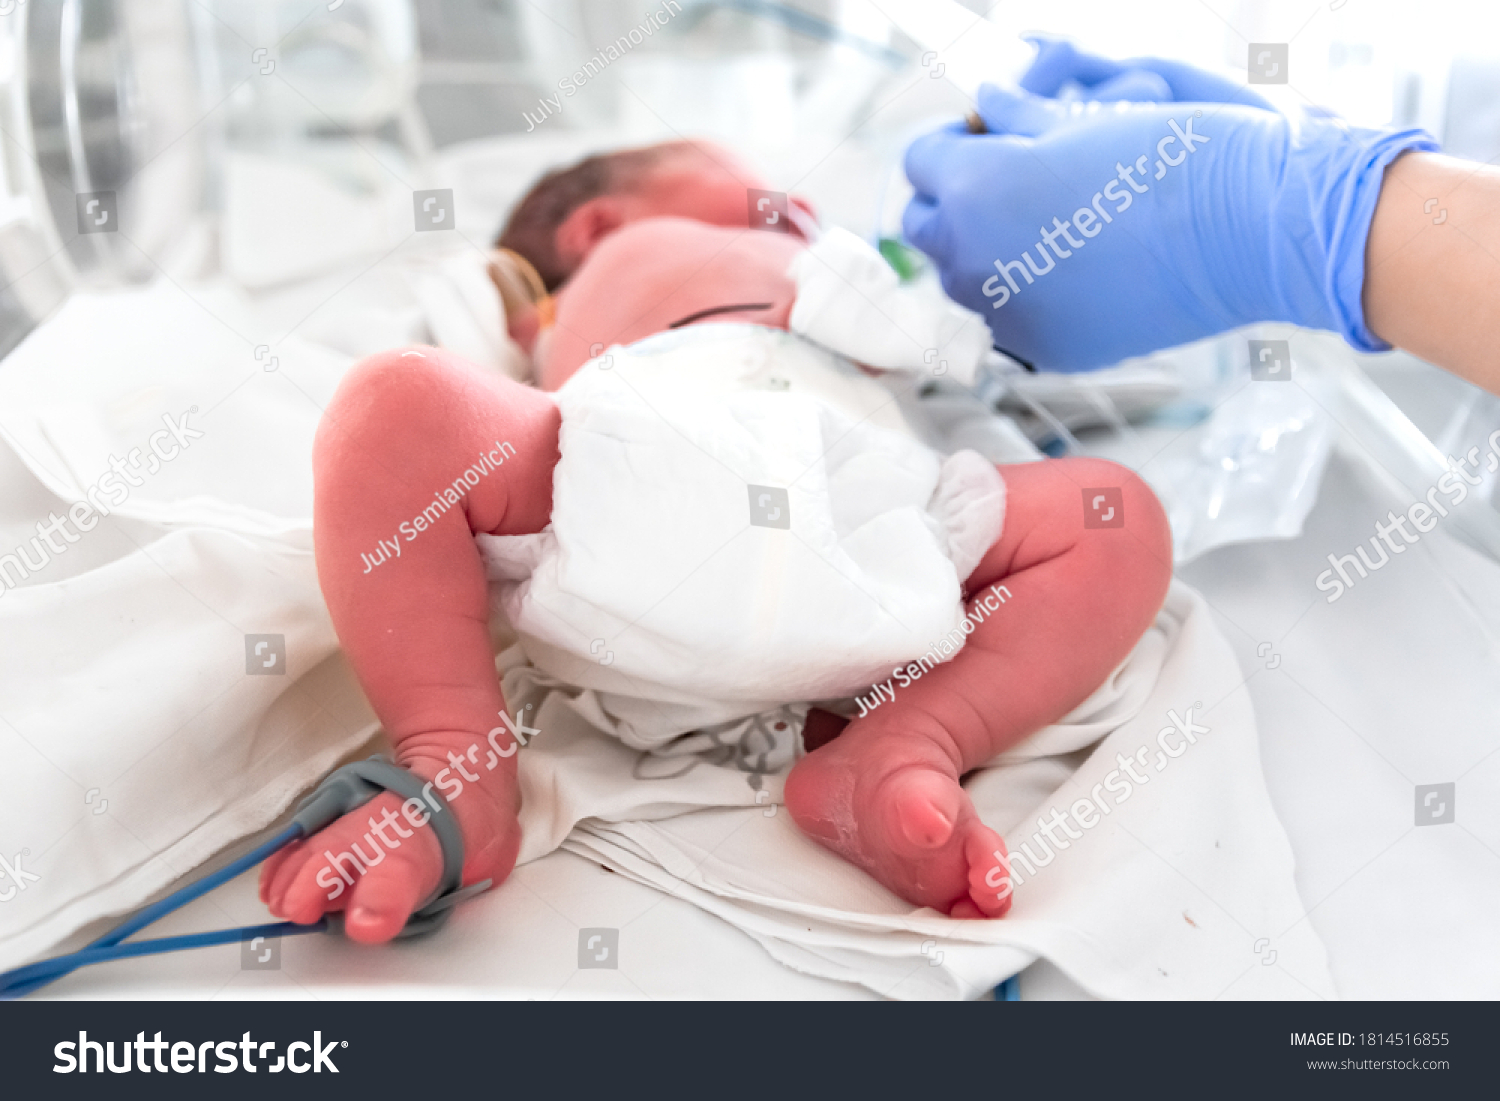 Nurse in blue gloves takes action to monitor and care for premature baby, selective focus on baby feet. Newborn is placed in the incubator. Neonatal intensive care unit #1814516855